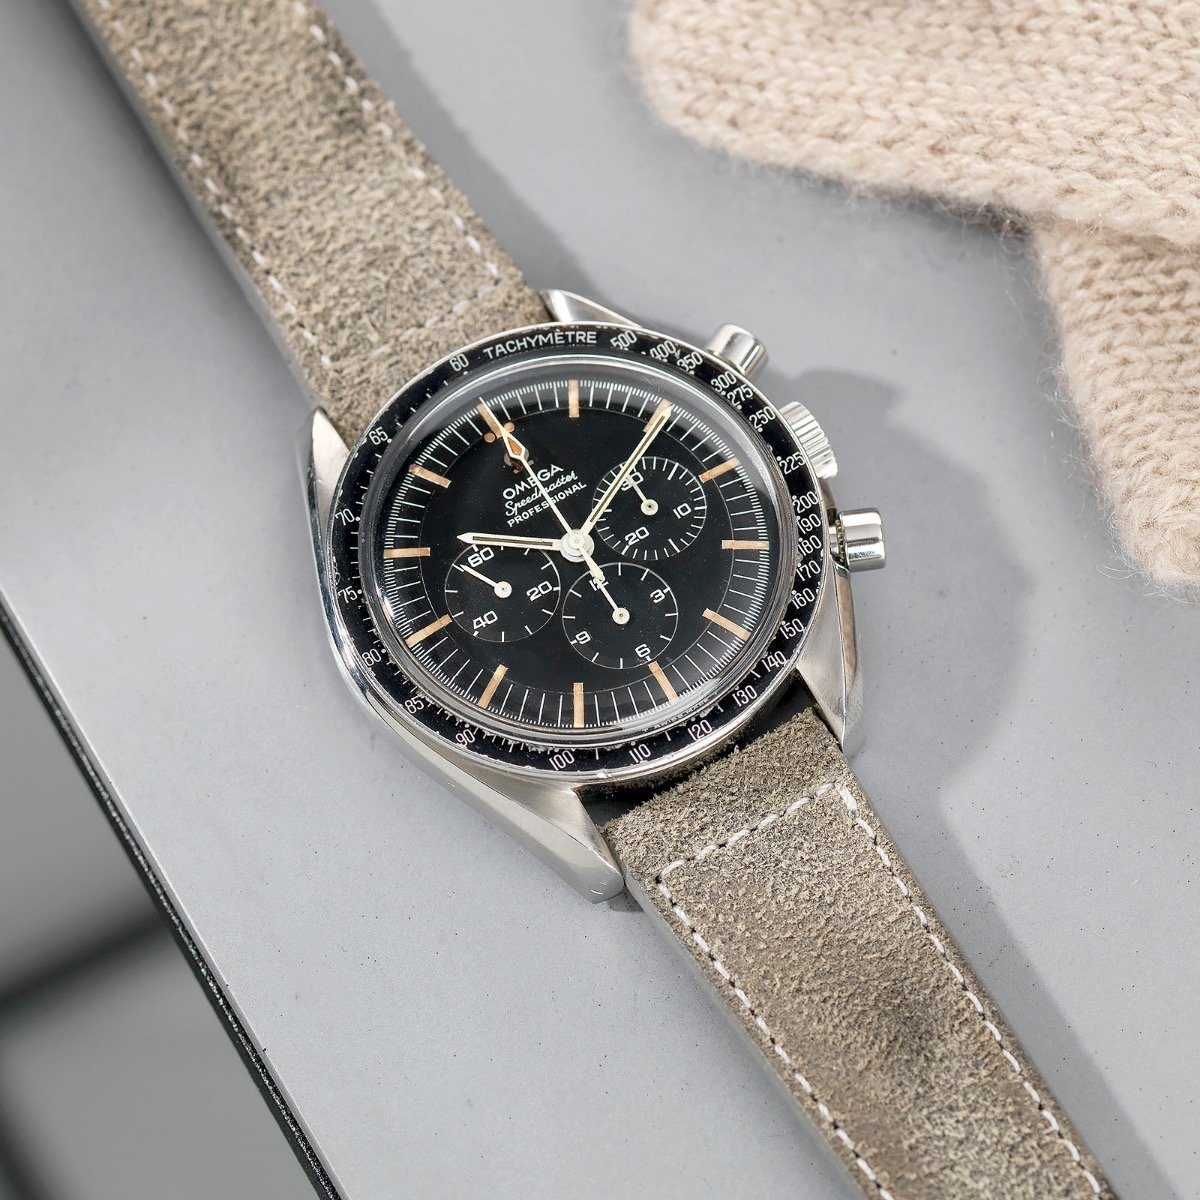 Omega Speedmaster 9 to 5 Curated Package 145.012-67